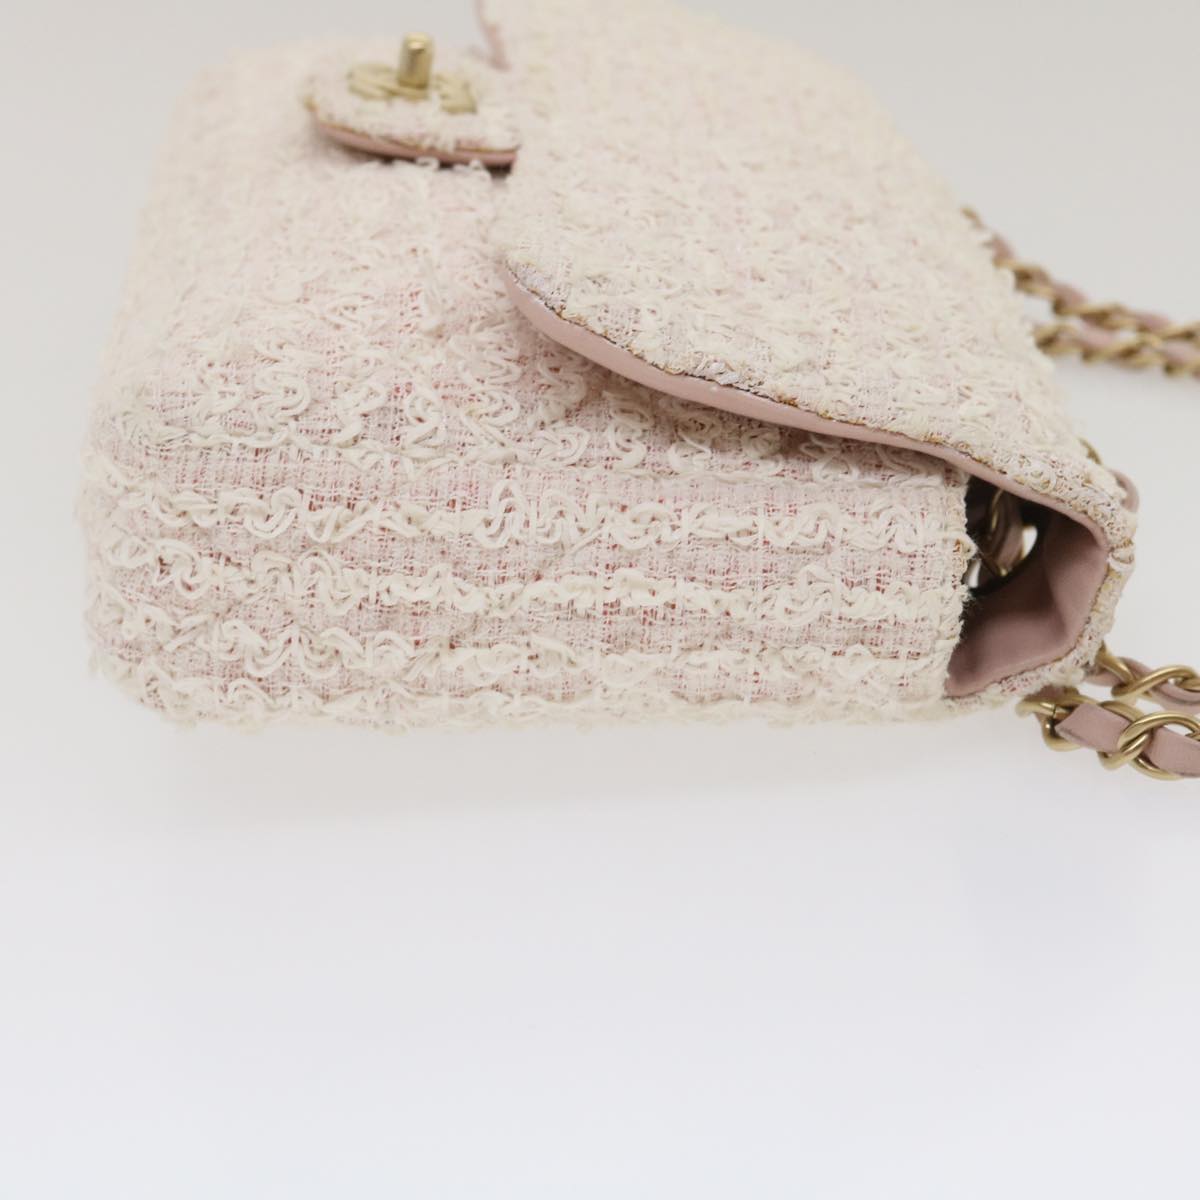 CHANEL Matelasse Tweed Turn Lock Chain Shoulder Bag White Pink CC Auth 35175A